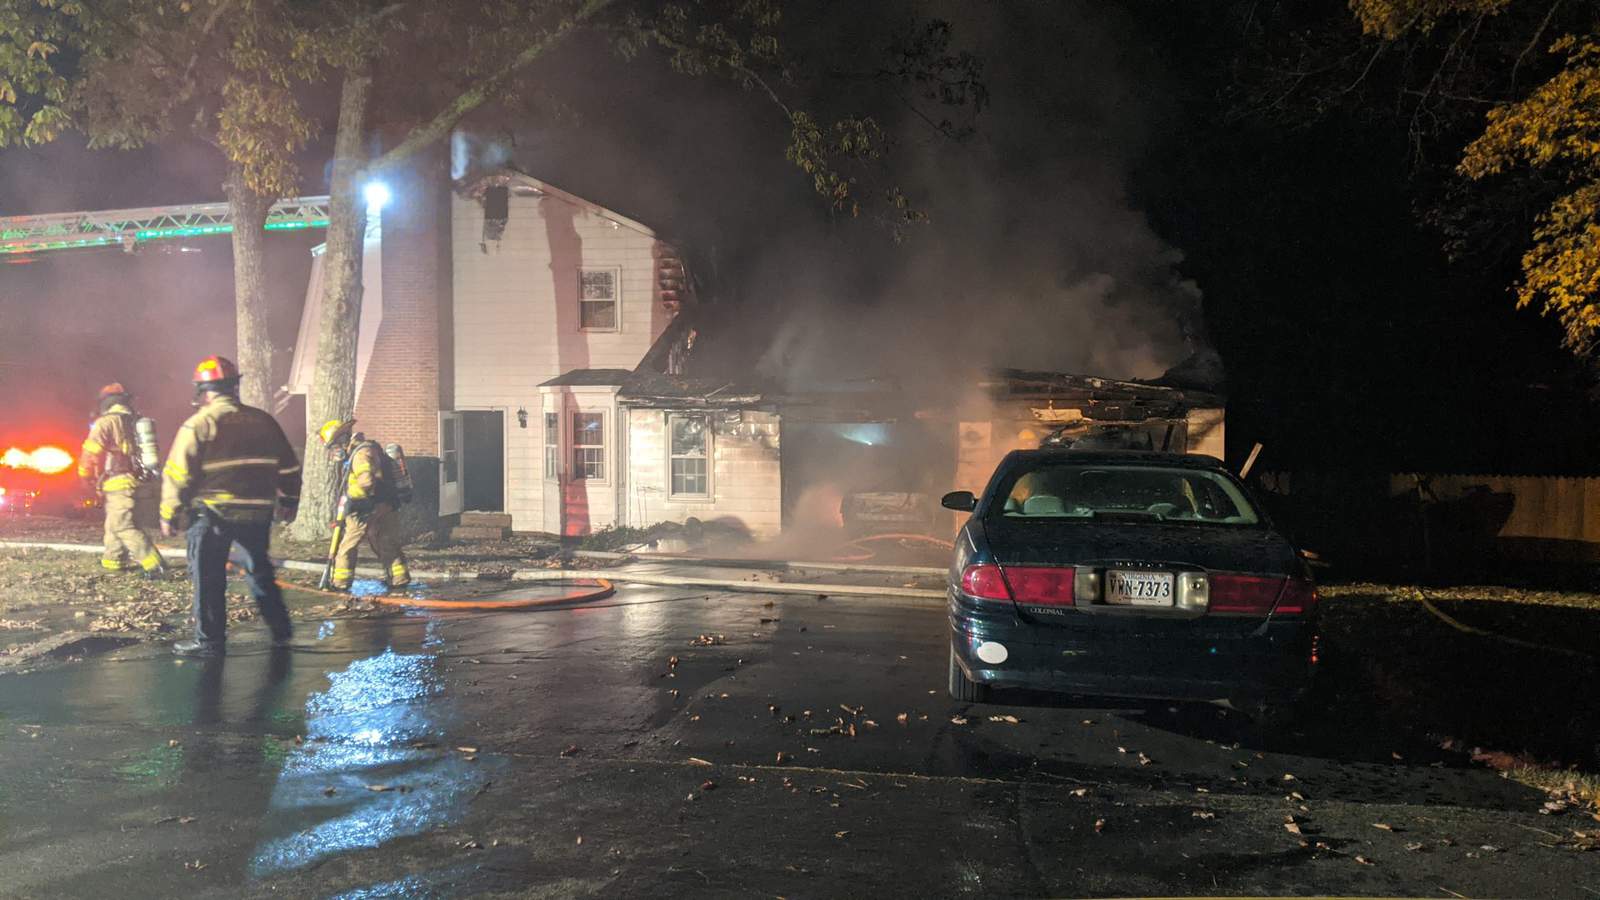 Crews respond to house fire off of U.S. 460 in Roanoke County